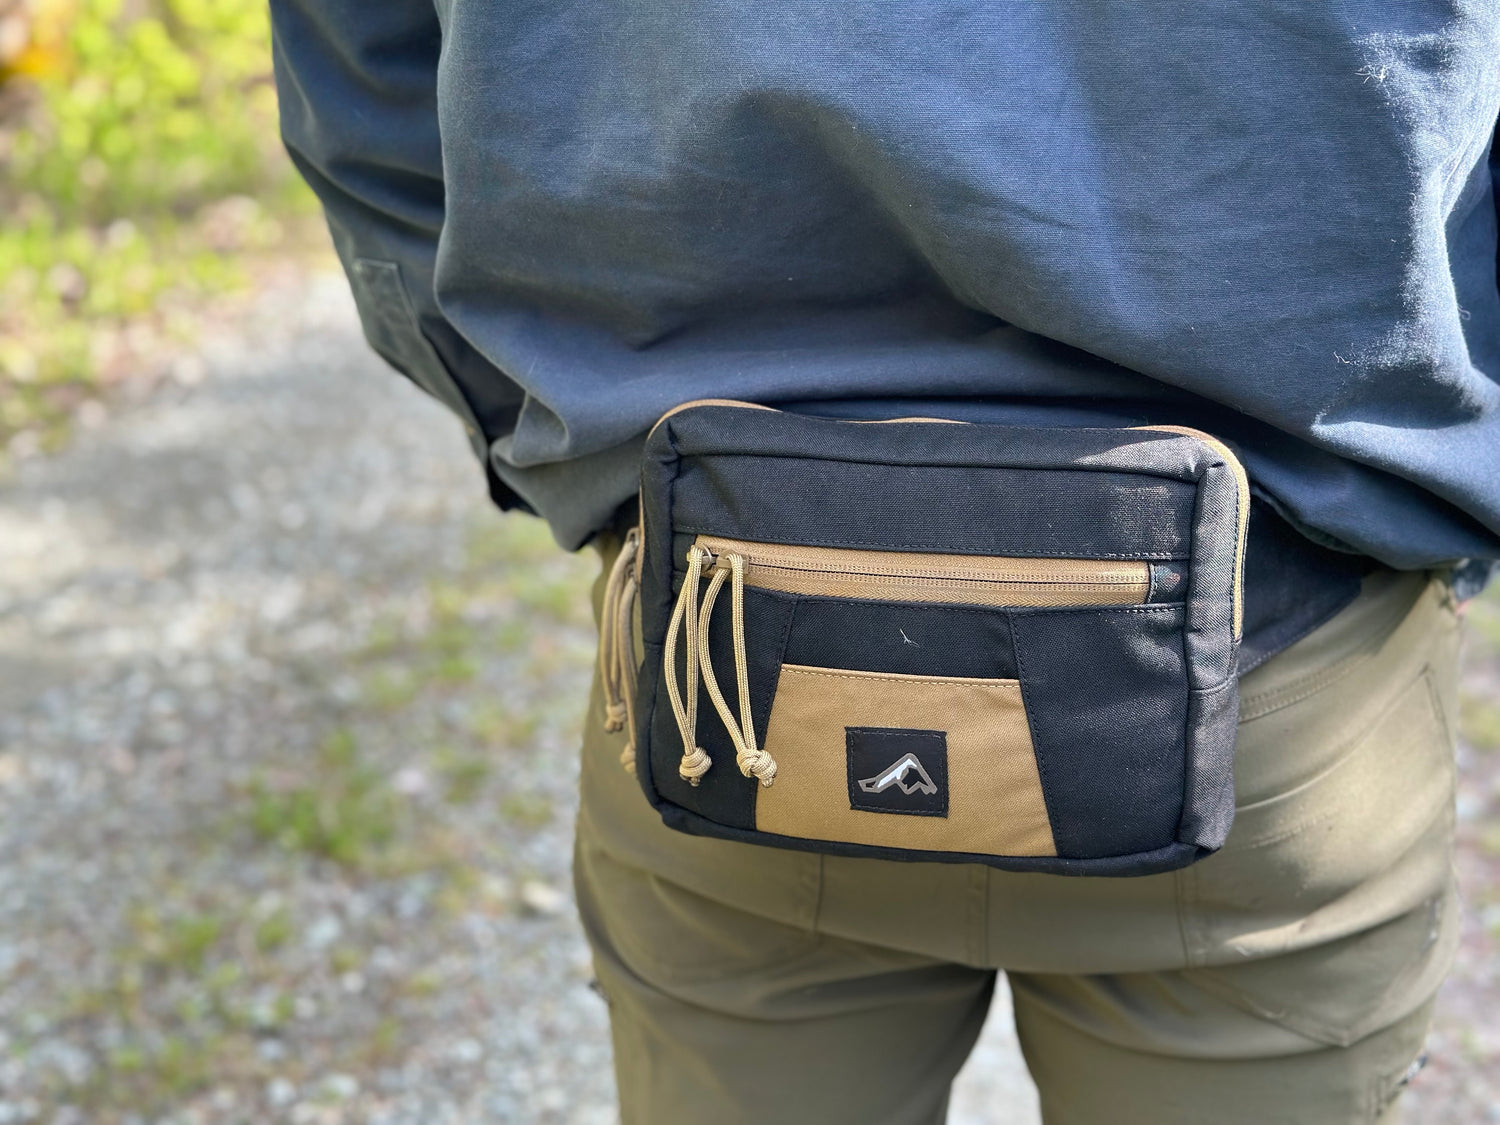 Ruckmule mountain gear Fanny pack collection 